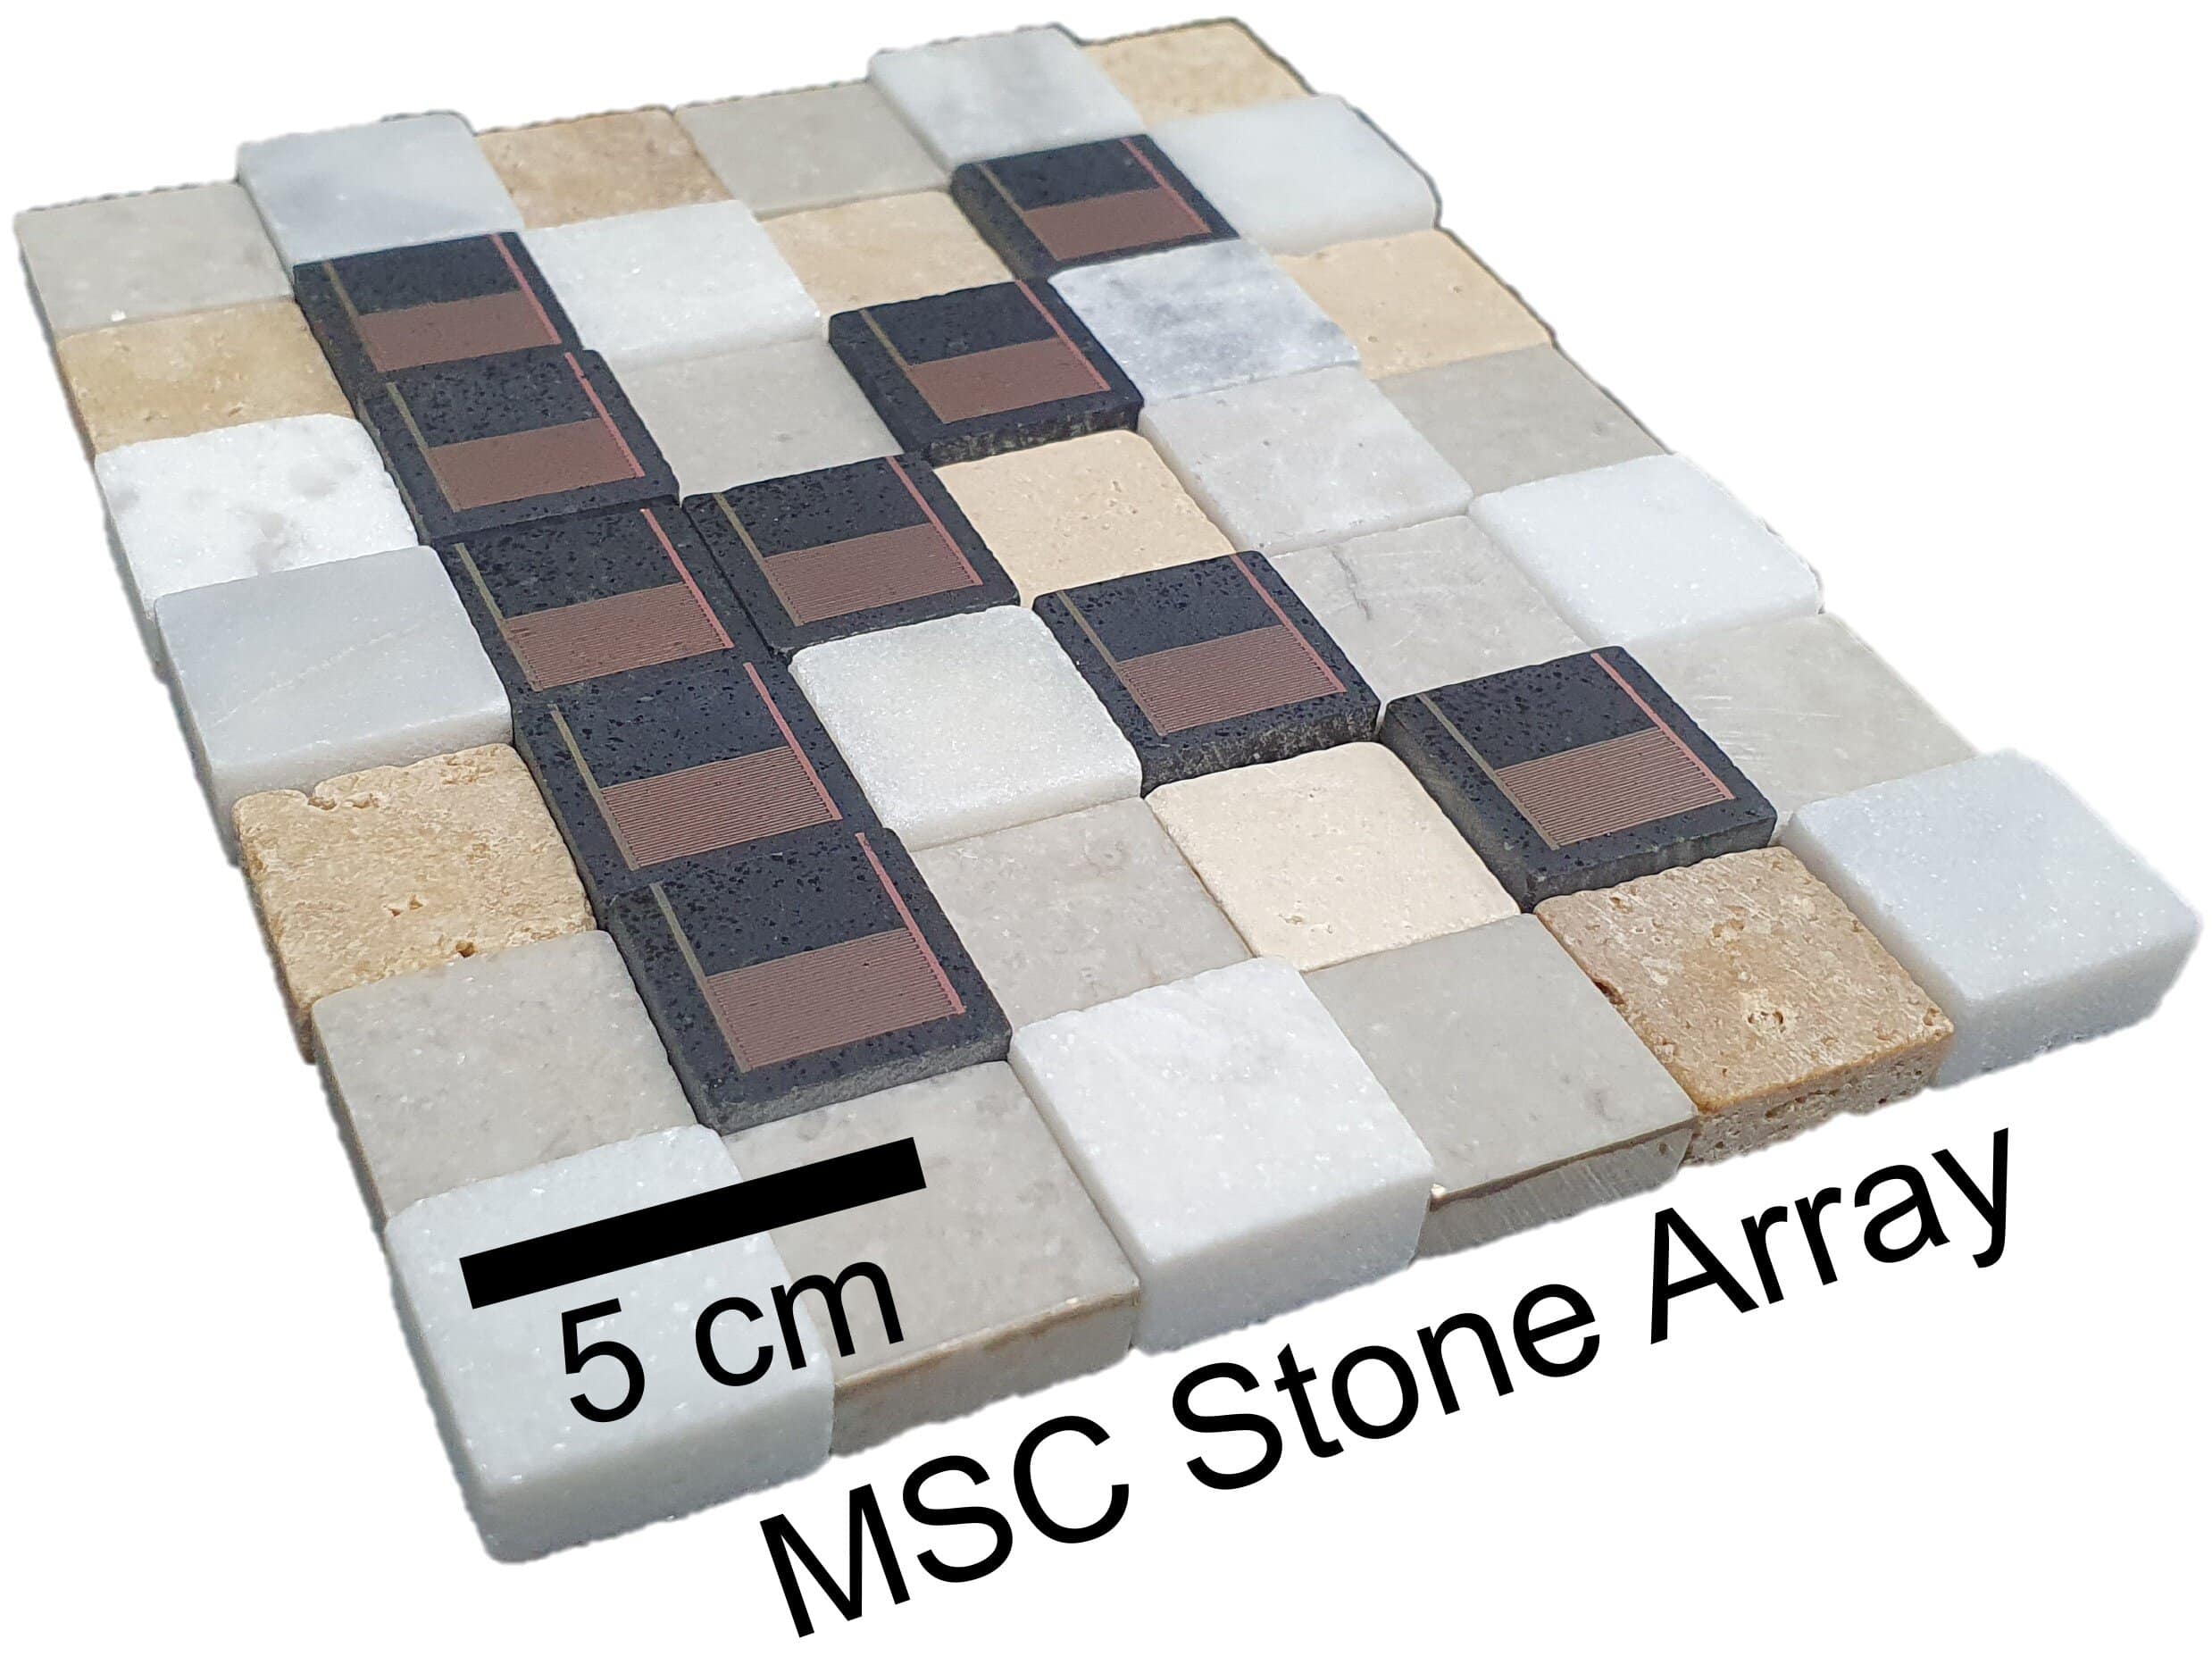 Smart Homes on Electronic Stones!